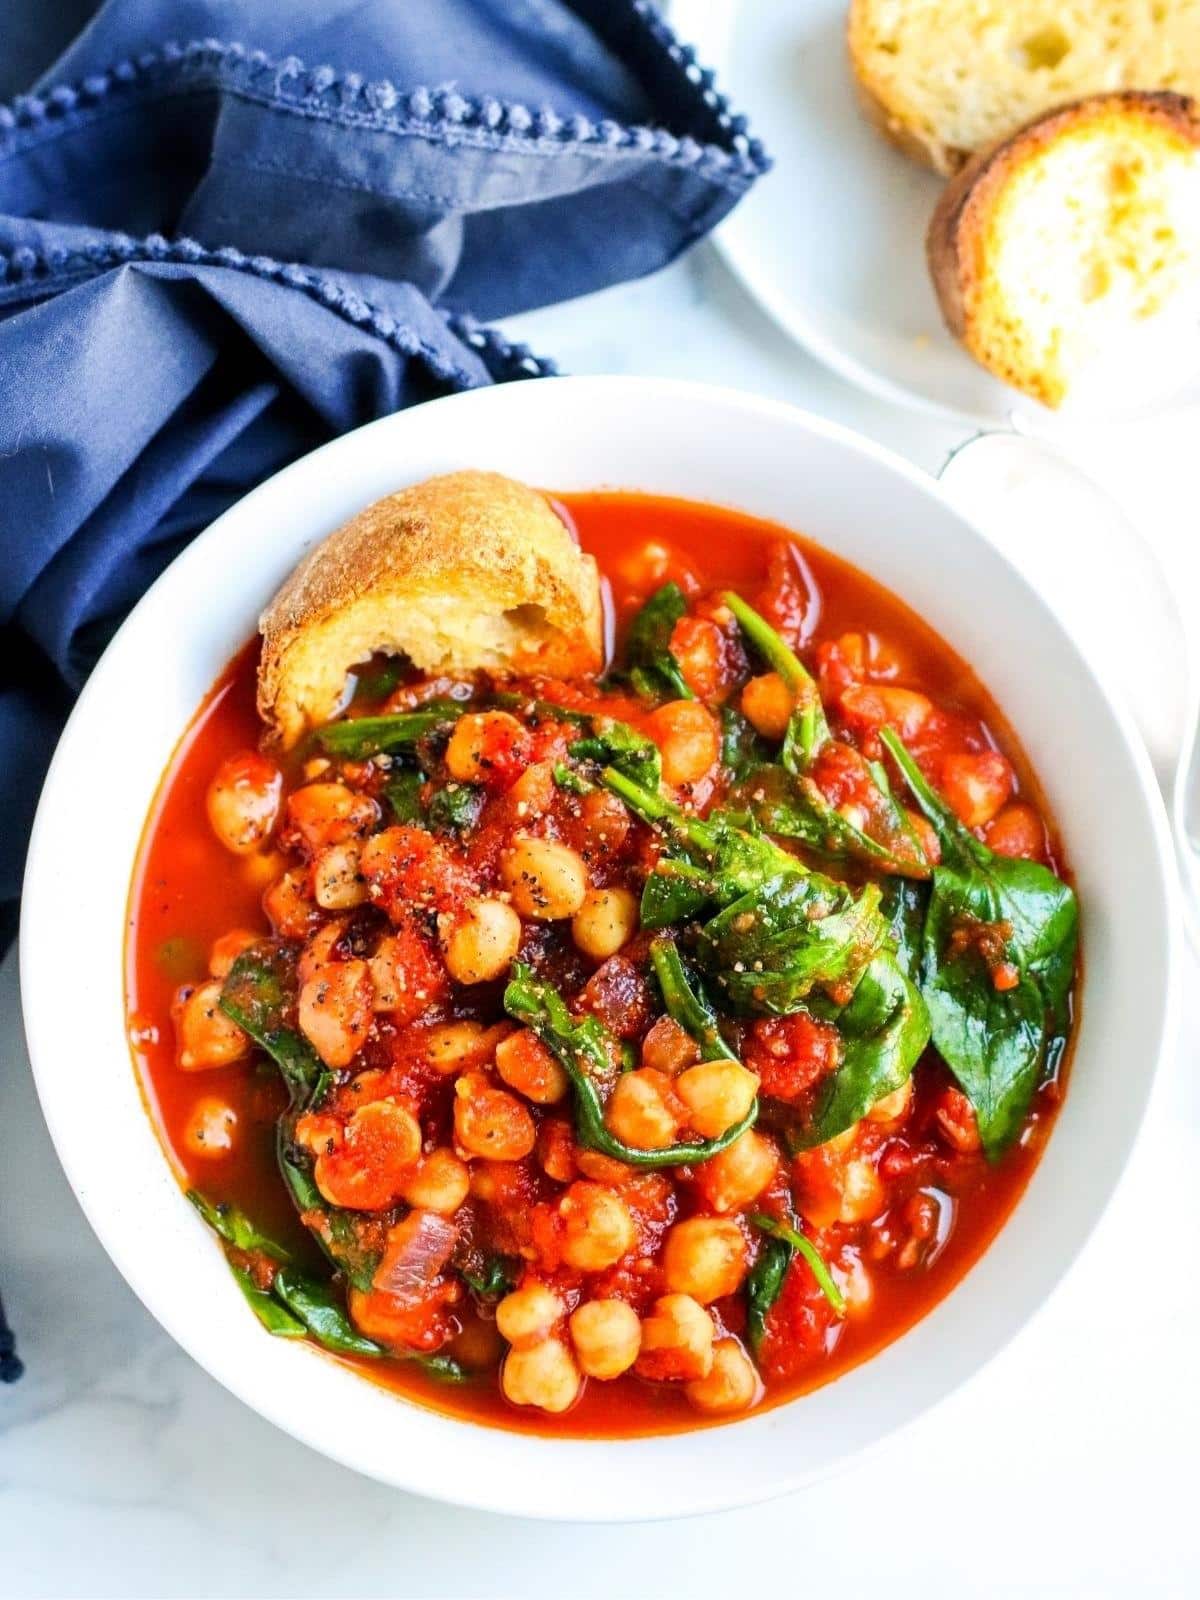 Bowl of Spanish Chickpea Stew with a piece of baguette in it.